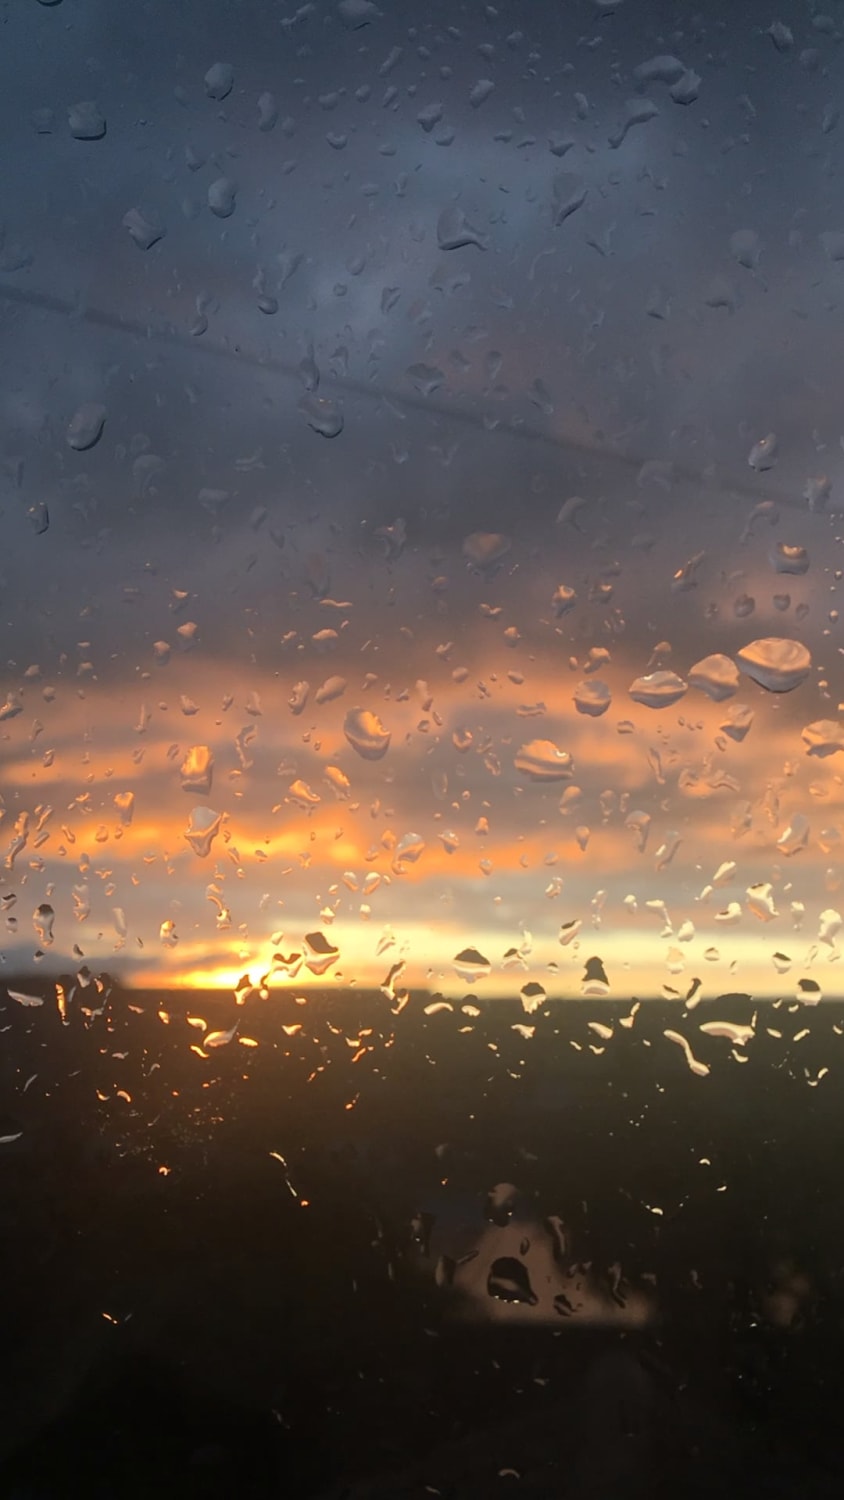 sunset after the rain (time lapse)